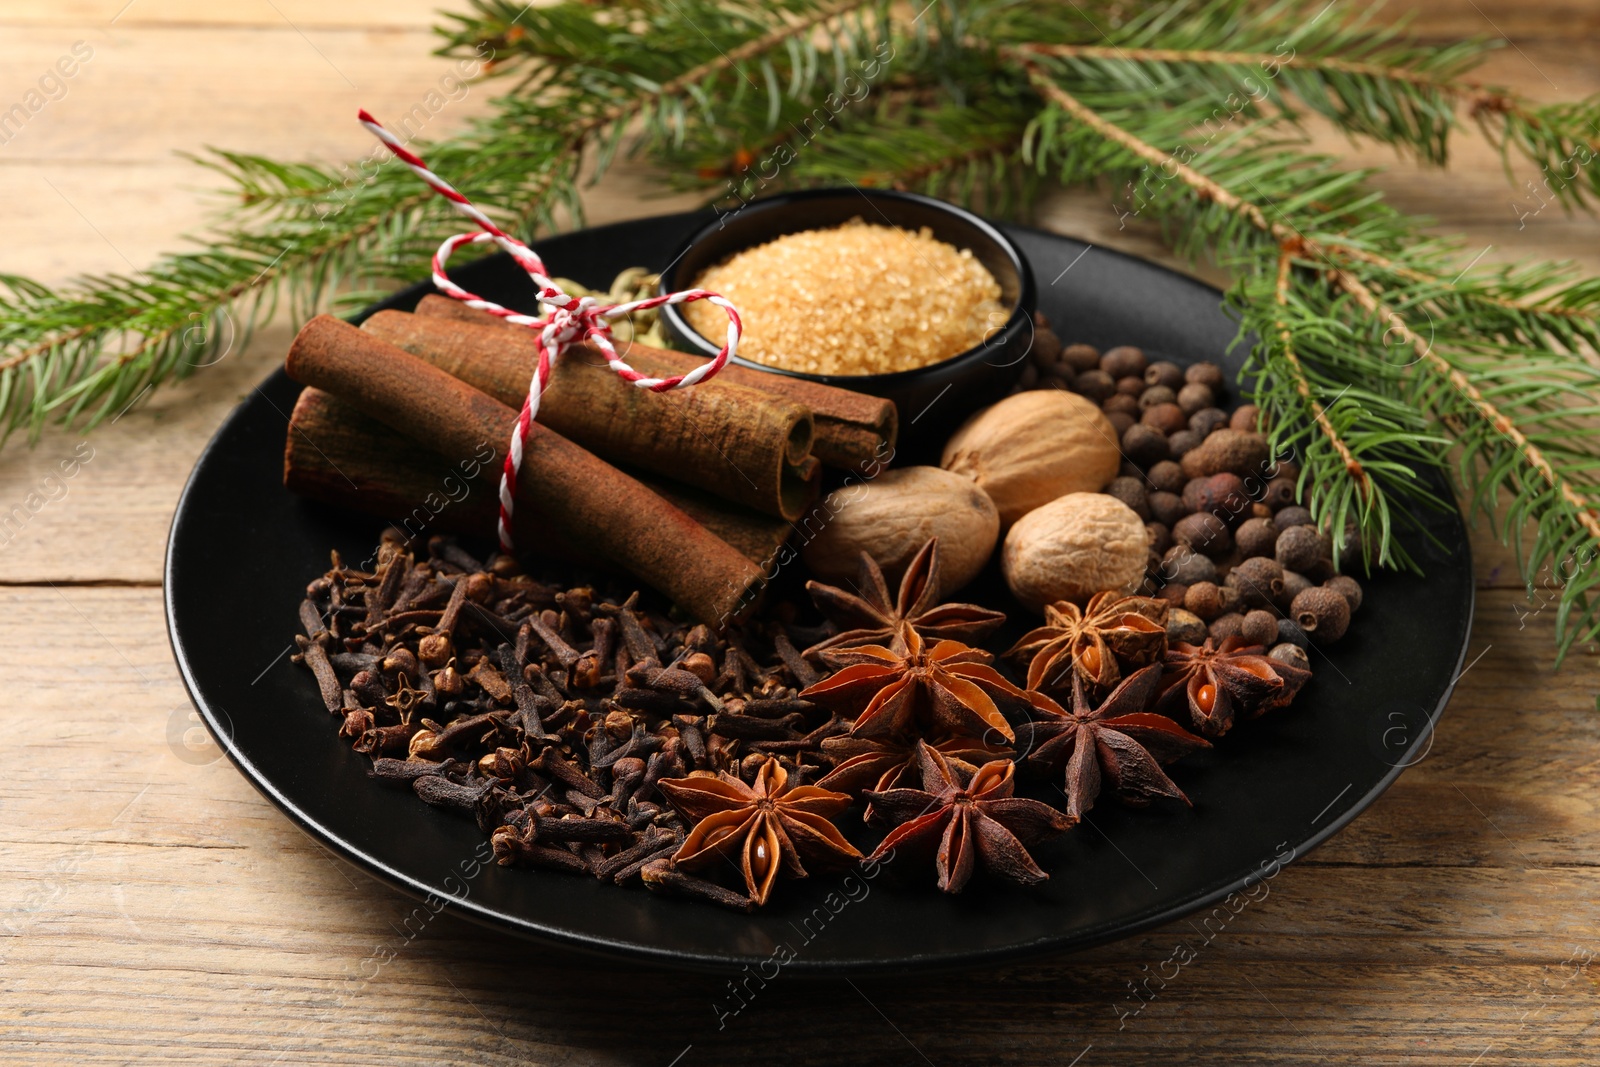 Photo of Dishware with different spices and fir branches on wooden table, closeup